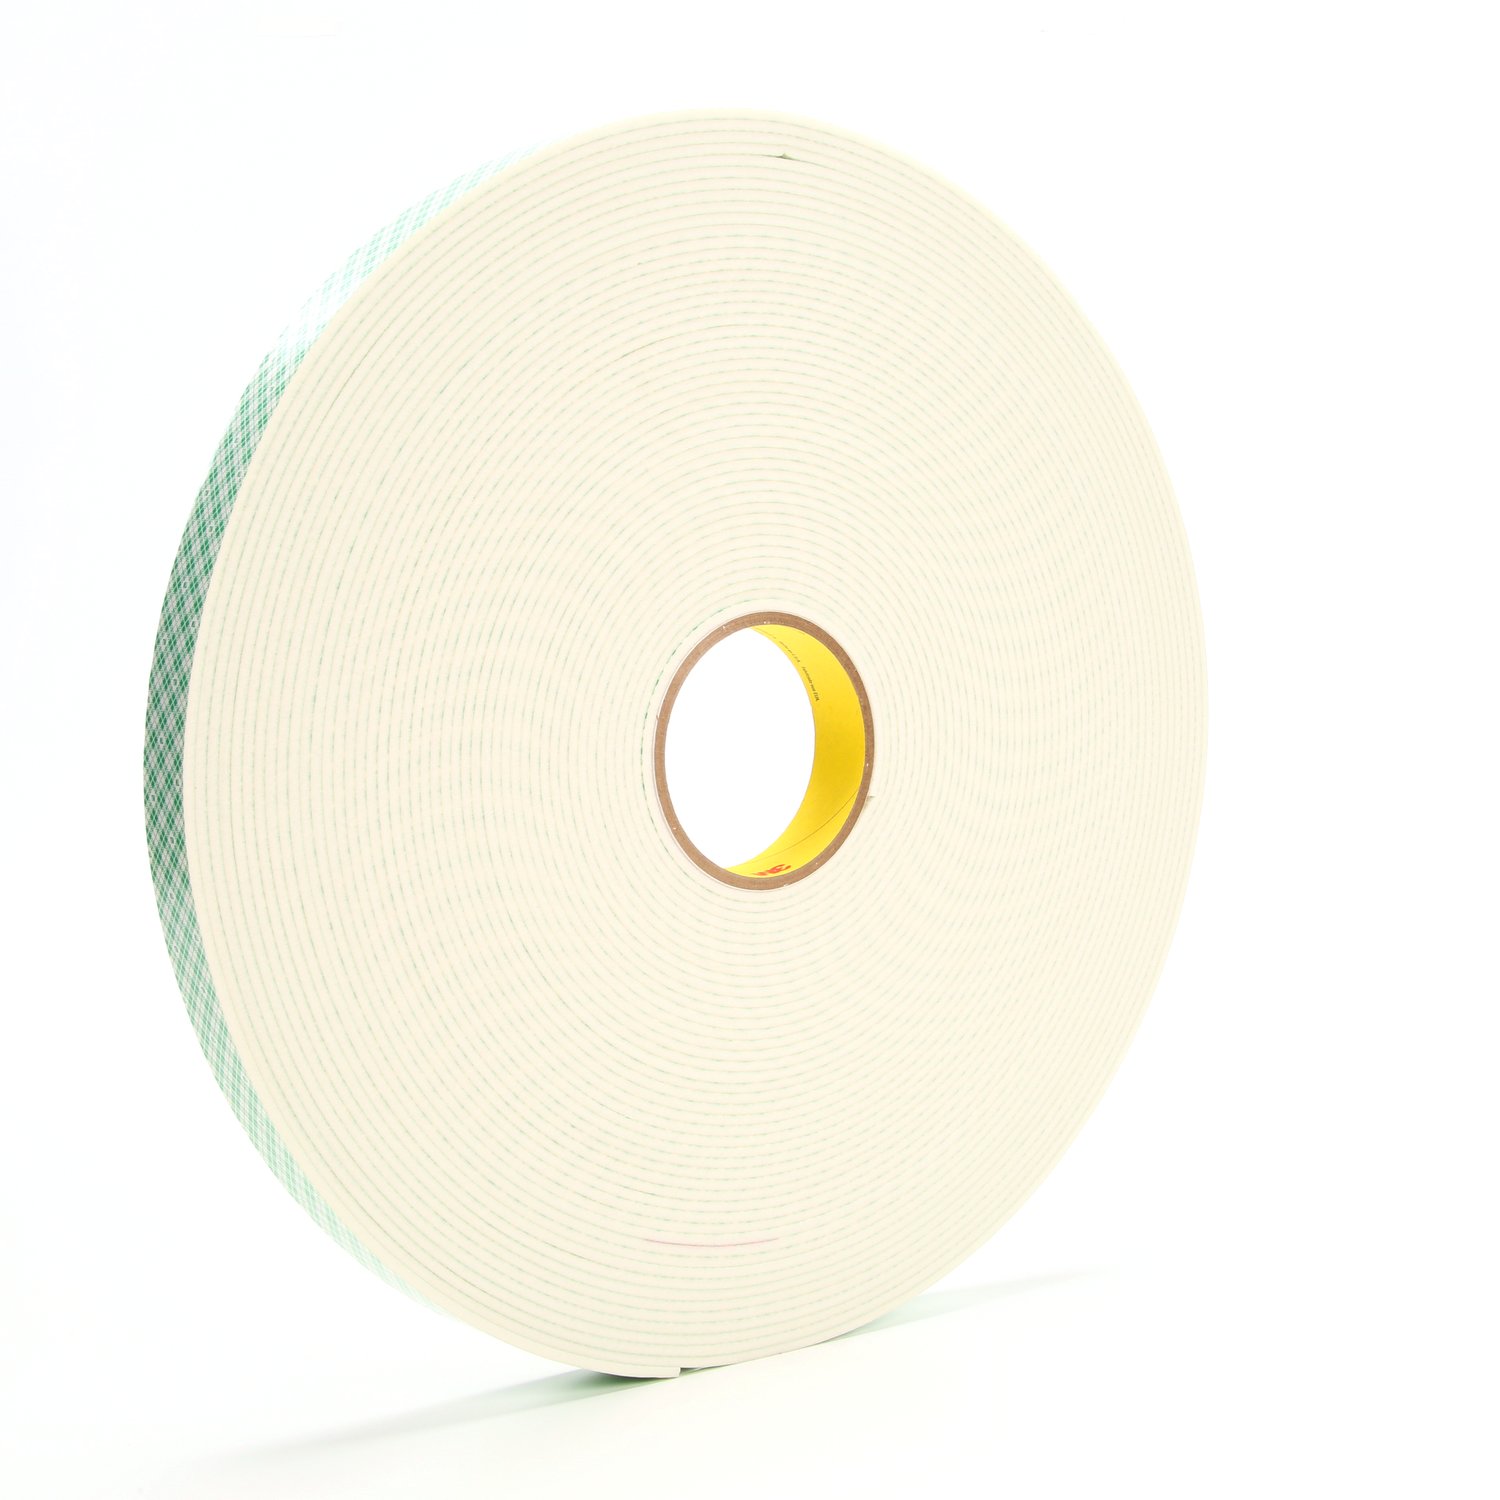 7000048483 - 3M Double Coated Urethane Foam Tape 4008, Off White, 1 in x 36 yd, 125
mil, 9 rolls per case